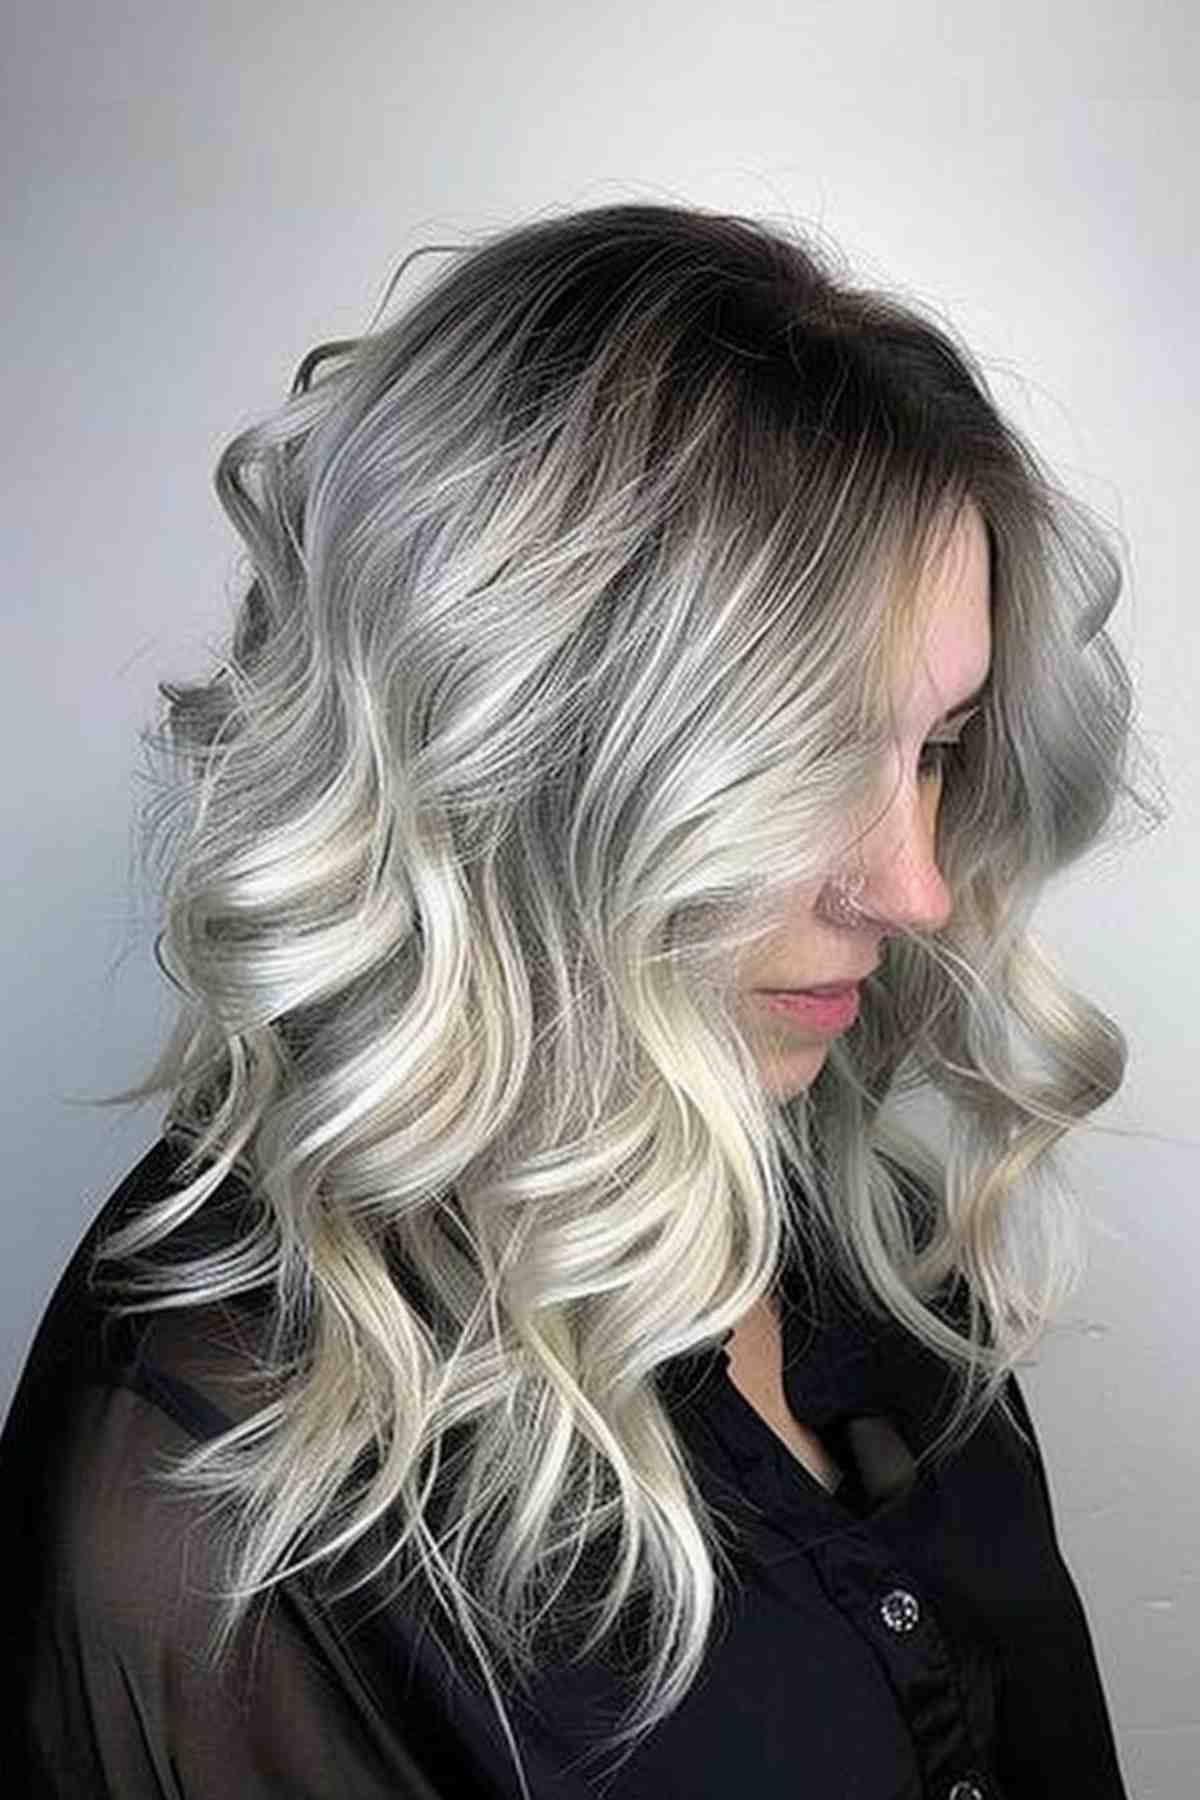 Long ombre hairstyle transitioning from dark roots to smoky grey and ending in luscious platinum blonde curls